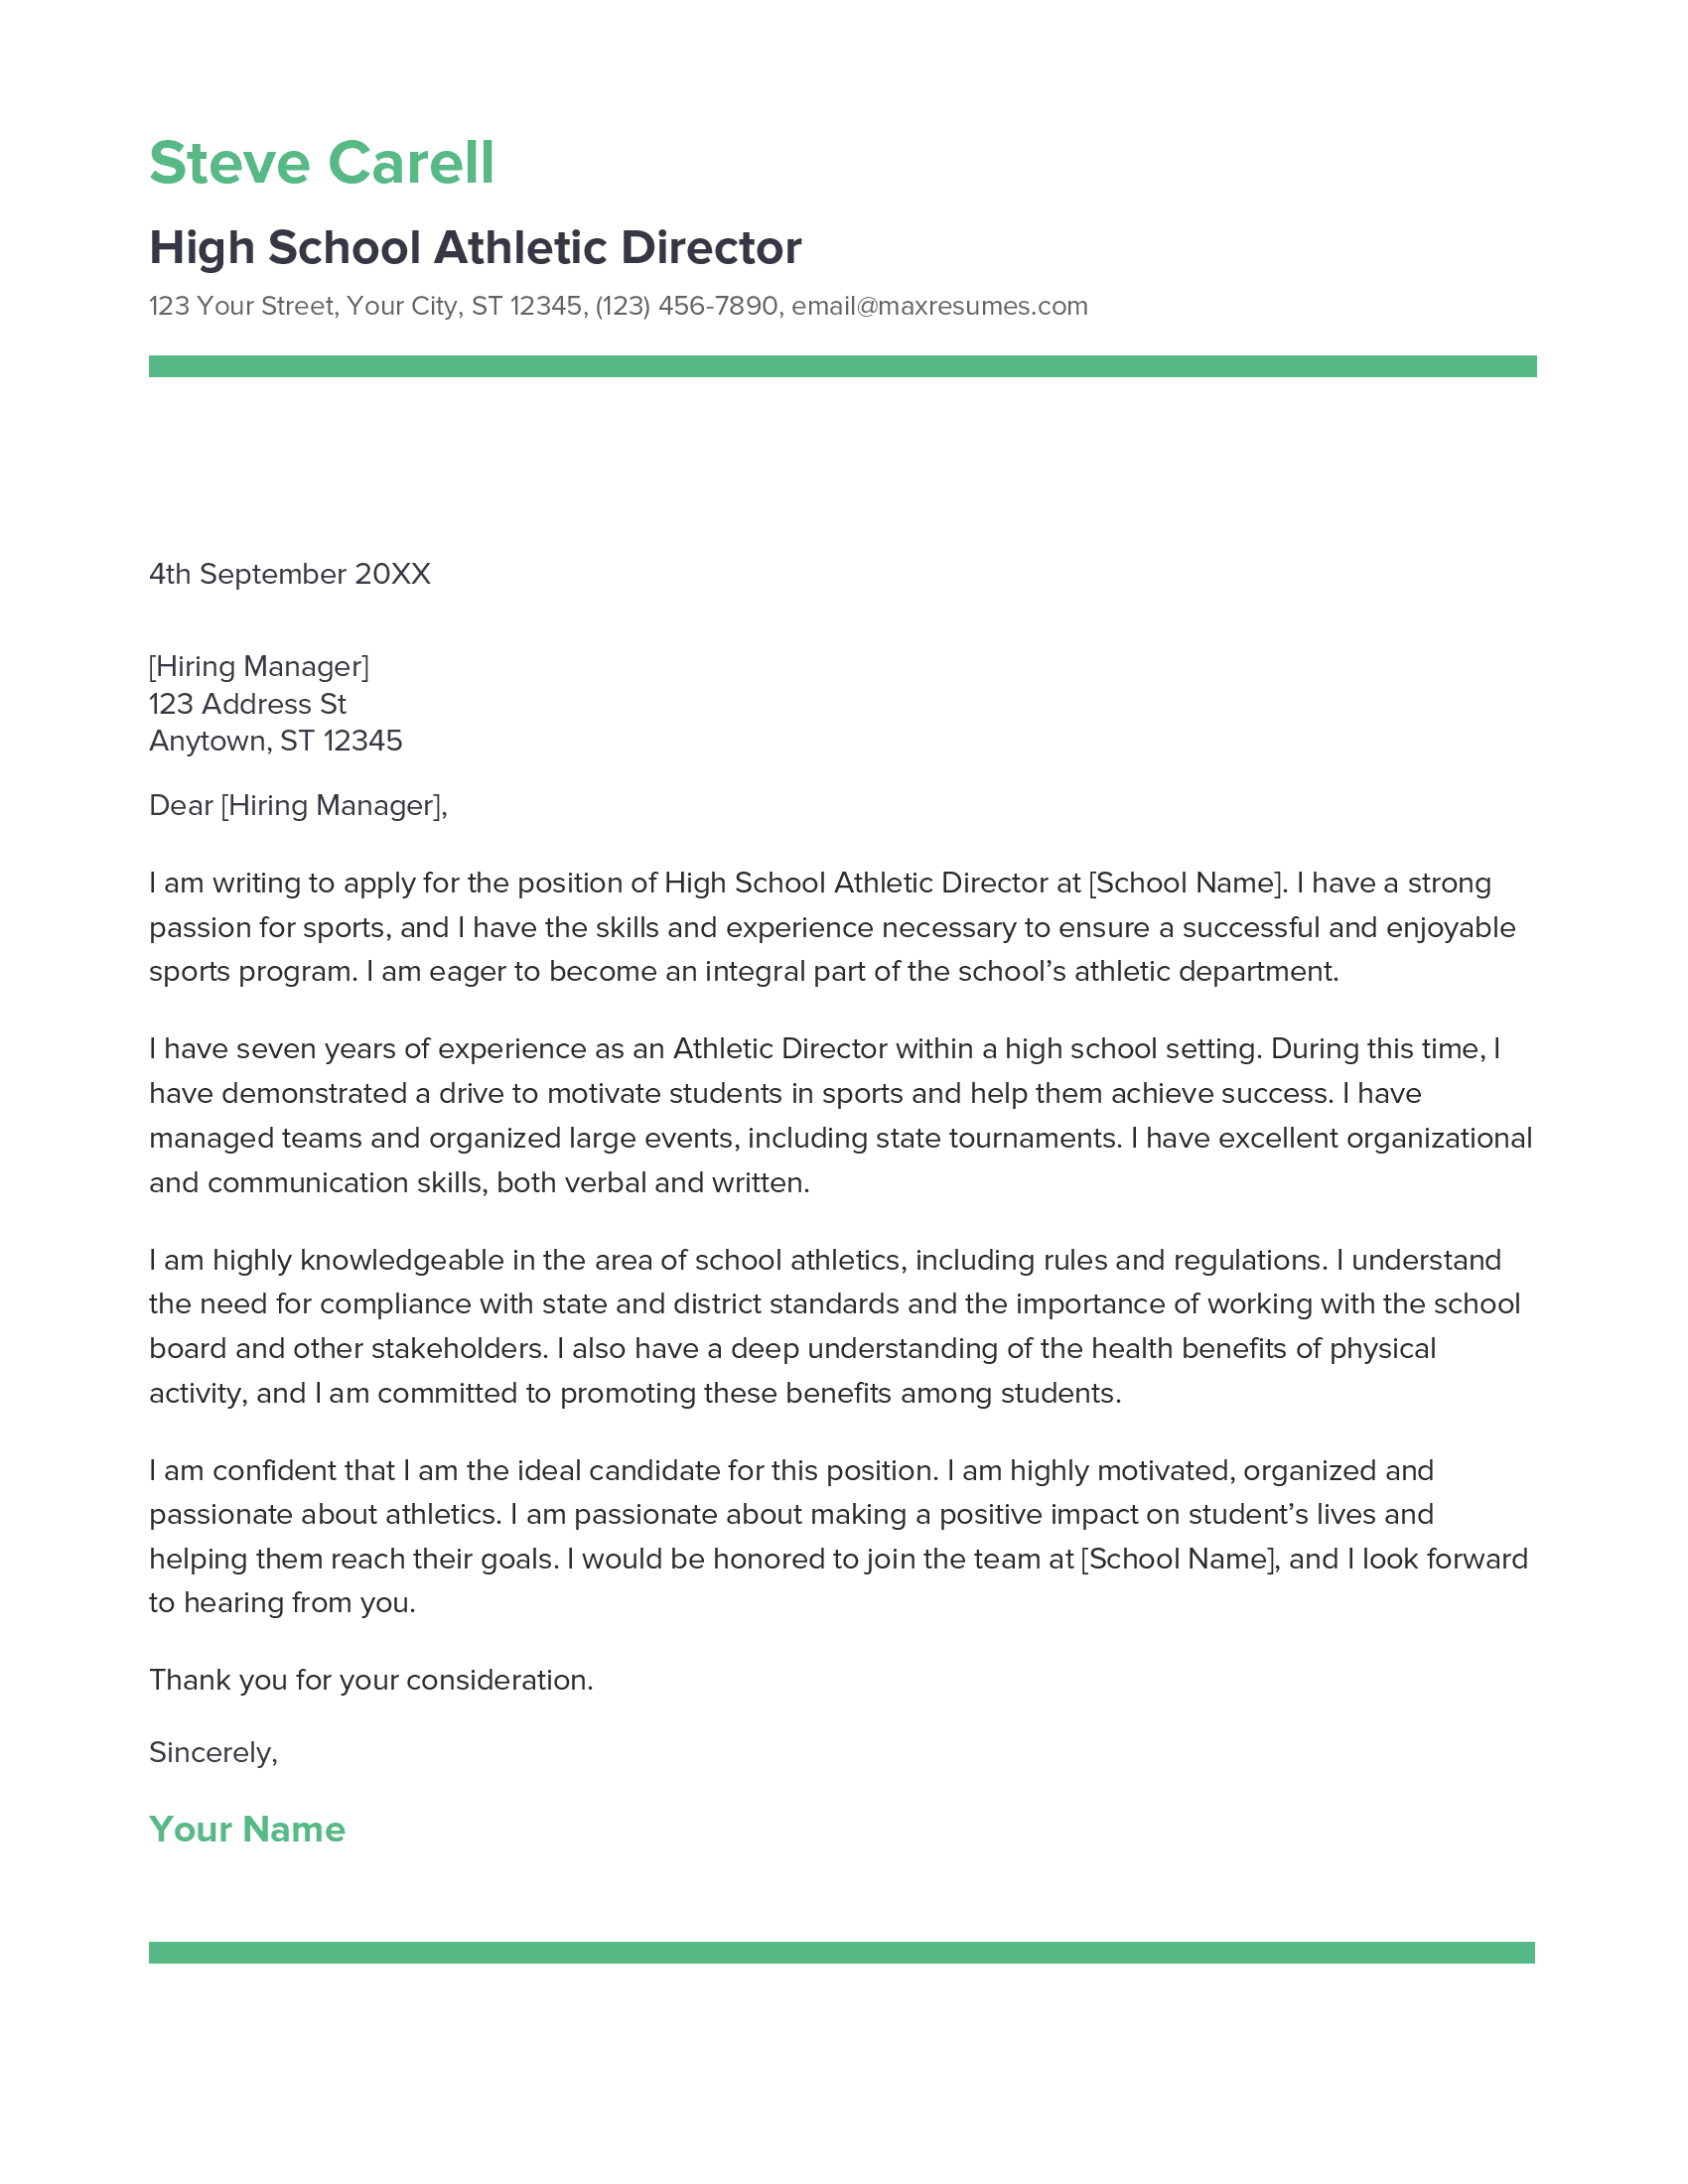 High School Athletic Director Cover Letter Example